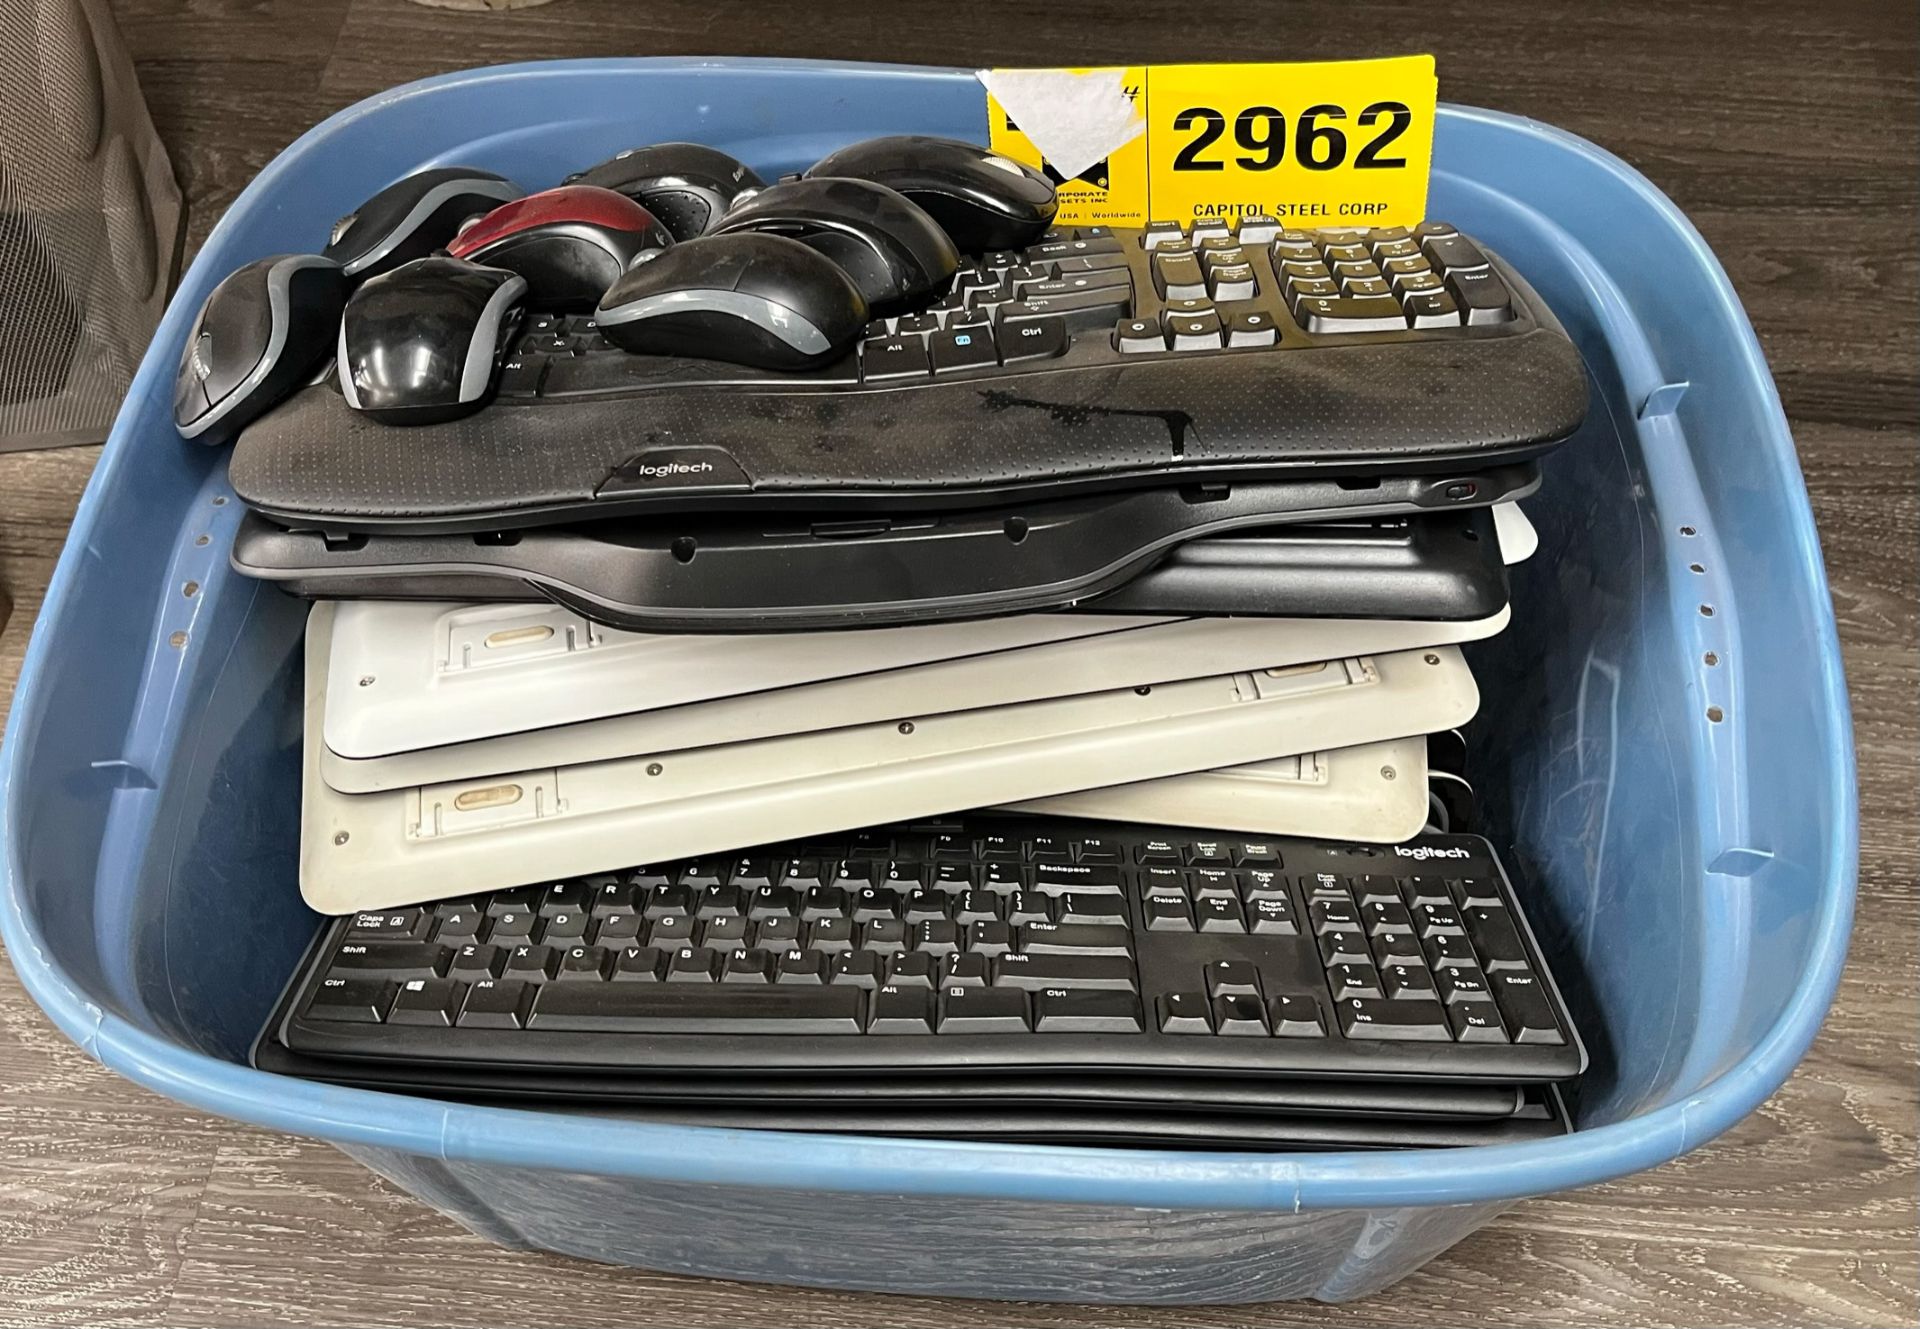 LOT/ TOTE OF KEYBOARDS AND MOUSES [RIGGING FEES FOR LOT #2962 - $125 USD PLUS APPLICABLE TAXES]